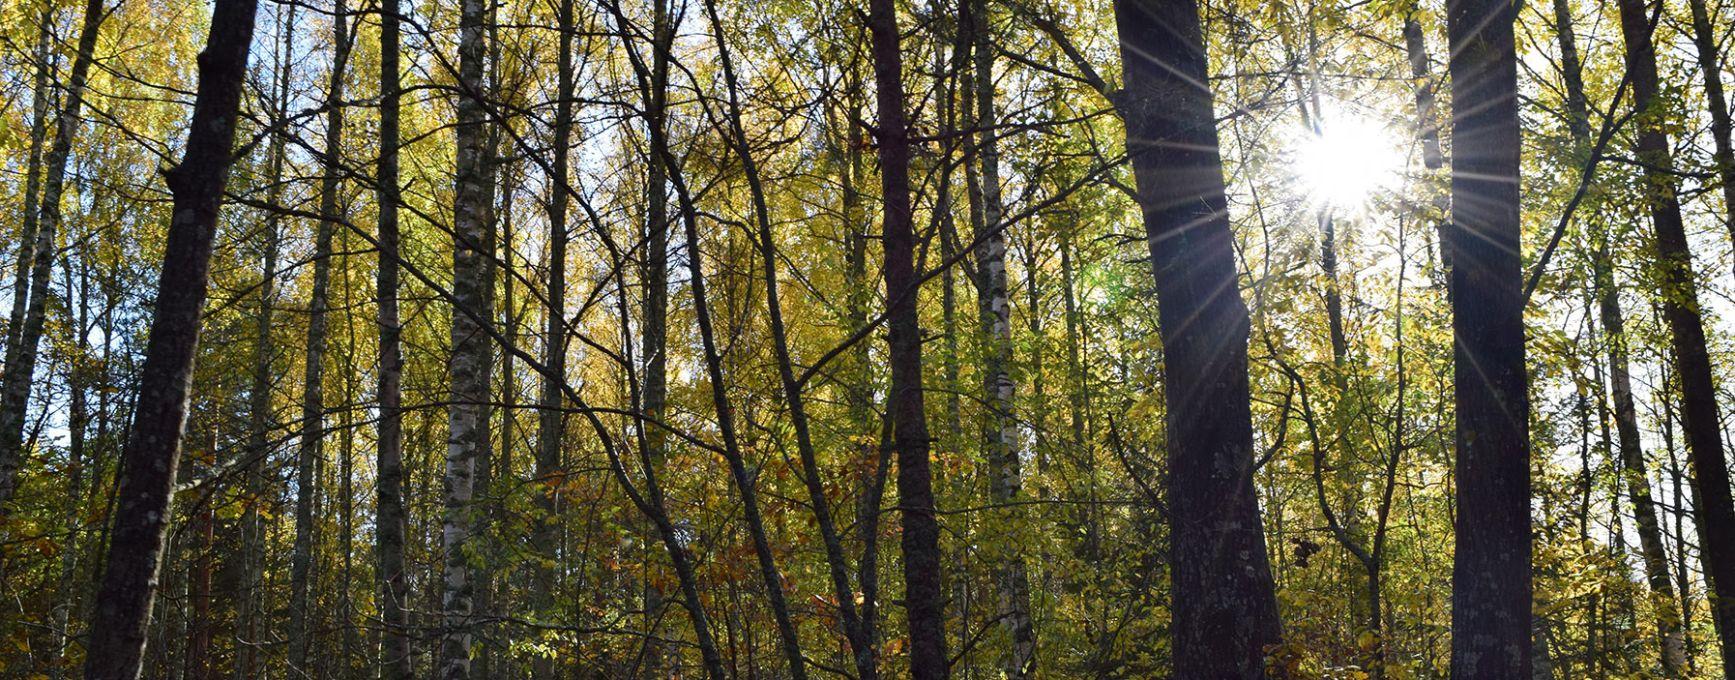 Sunlight shines through the trees in one of Ruissalo's famous forests.